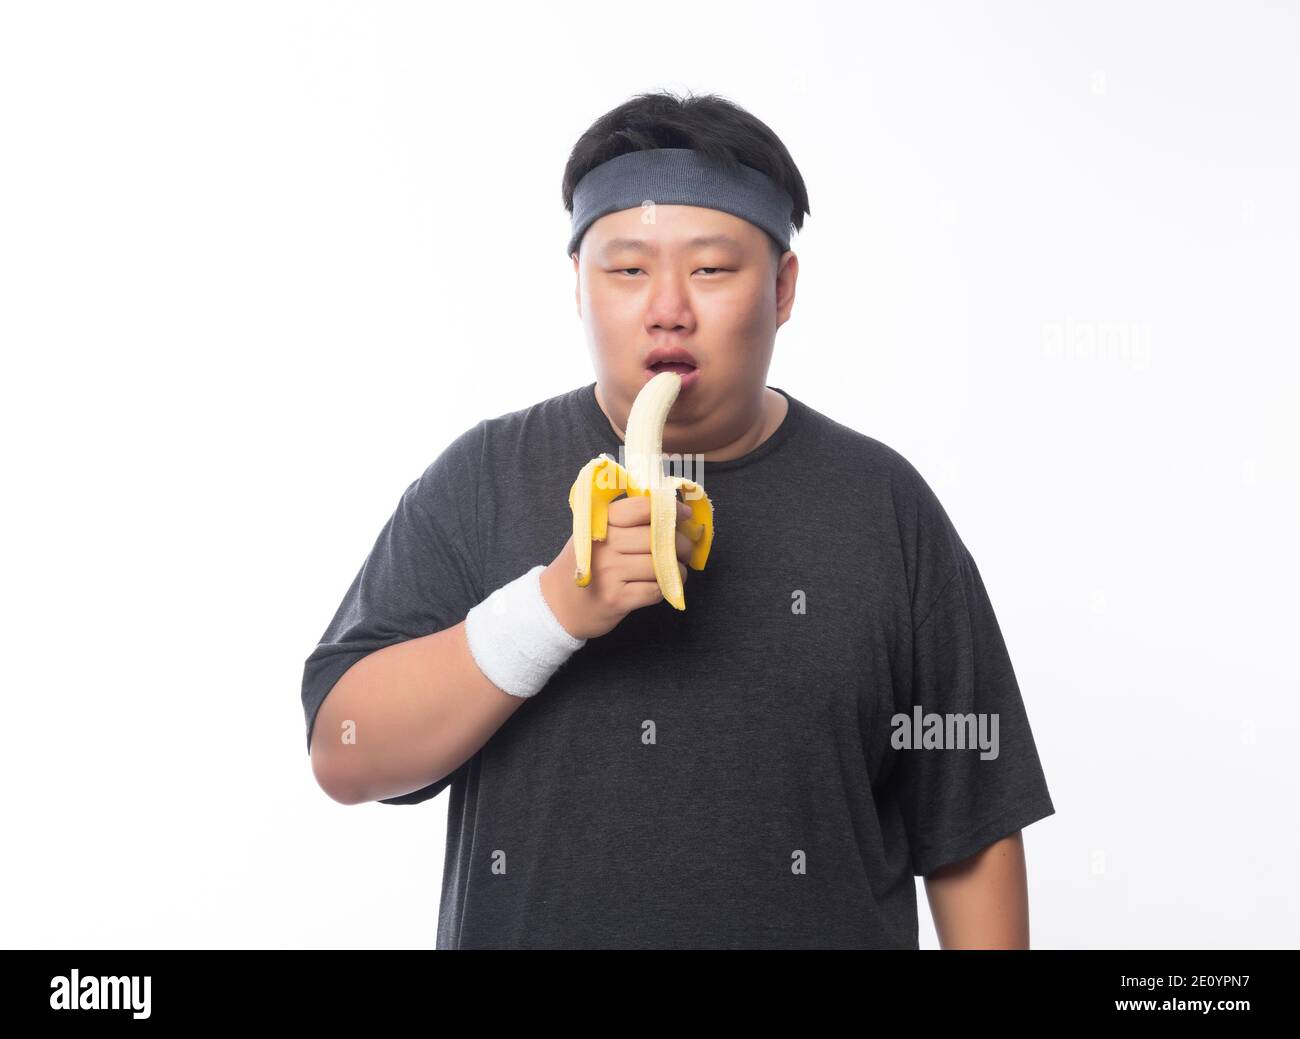 Young Asian funny fat sport man eating banana isolated on white background. Healthy lifestyle concept. Stock Photo